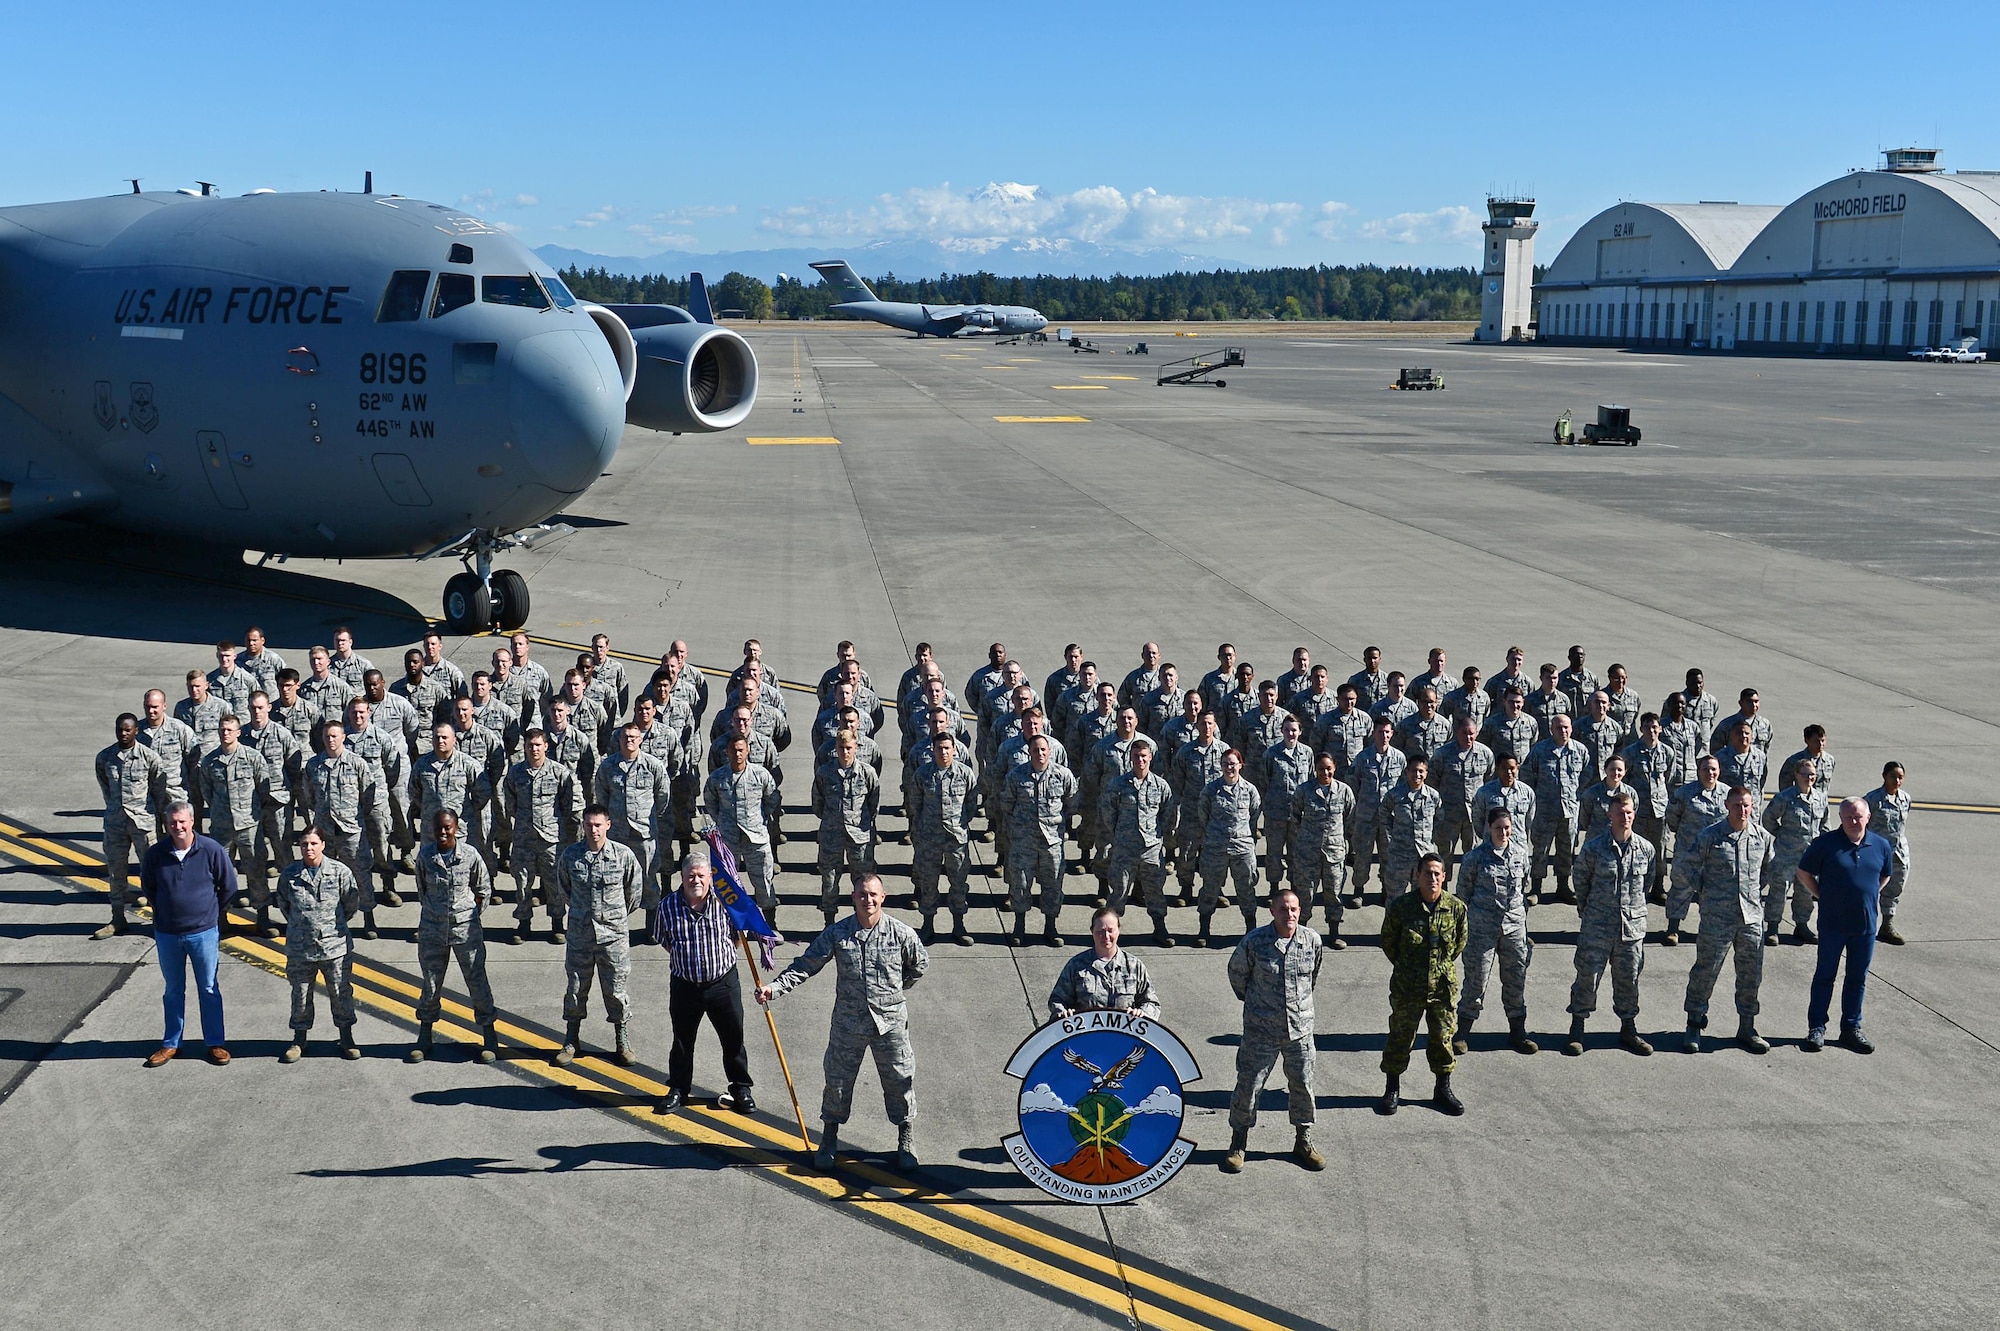 The 62nd Aircraft Maintenance Squadron poses for a group photo Sept. 12, 2016 at Joint Base Lewis- McChord, Wash. The 62nd AMXS Innovation Team was selected for the United States Transportation Command Commander's Innovation Showcase Award for the third quarter on Sept. 16, 2016. The team’s innovation has saved more than 2,000 man-hours and $4,700 and is forecasted for an estimated annual time savings of 5,400 man-hours and $24,000 cost avoidance. (U.S. Air Force photo/Senior Airman Divine Cox)